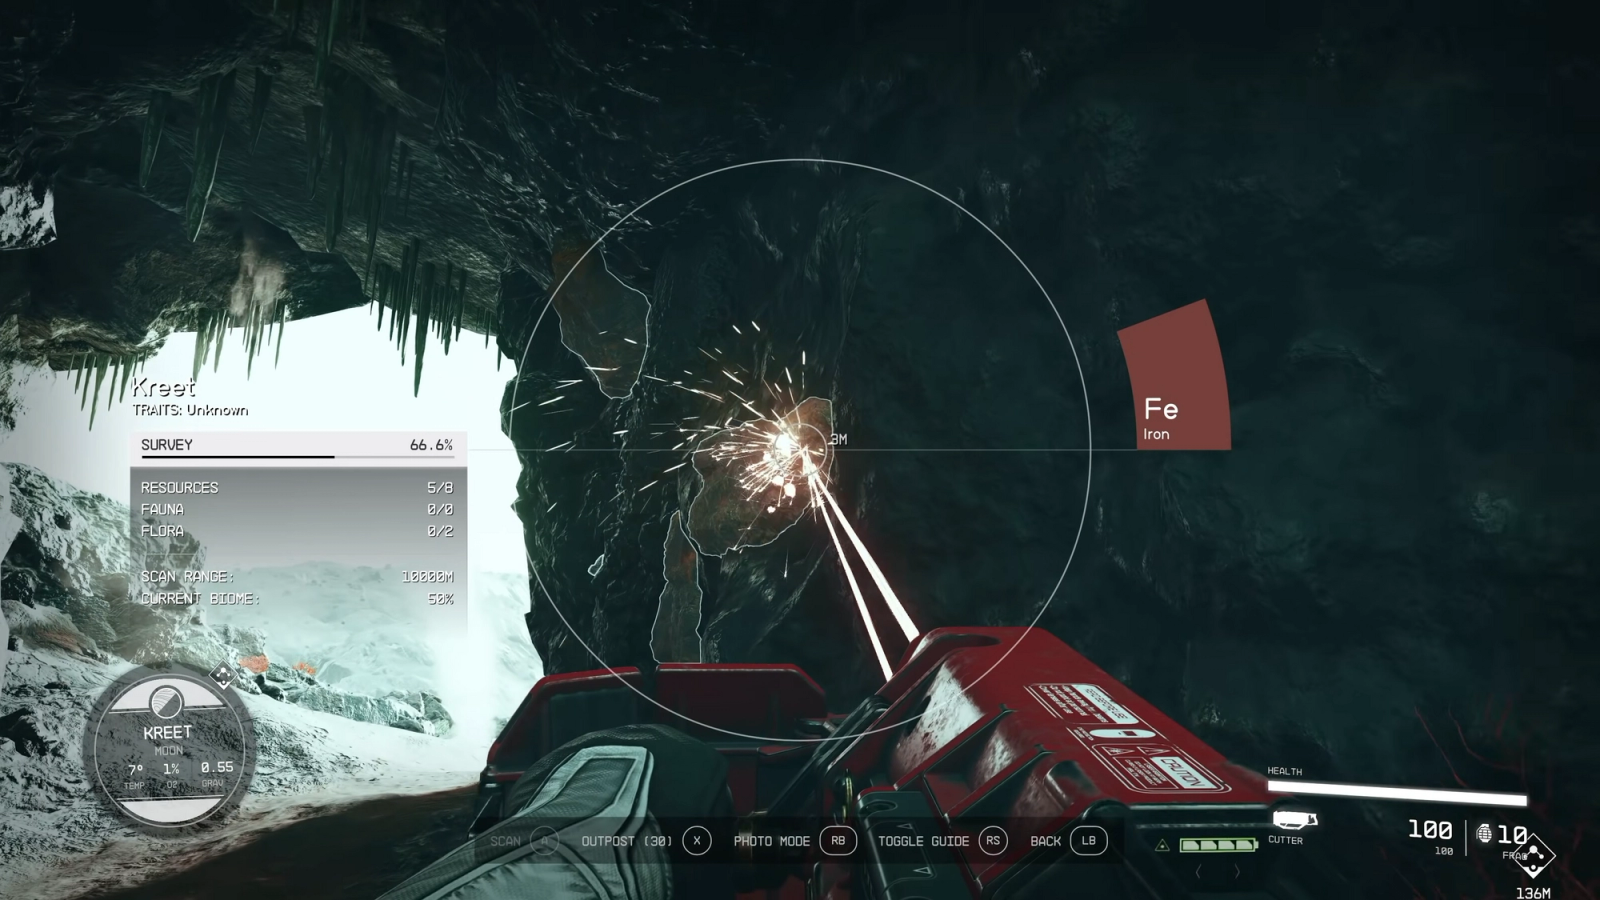 Starfield gameplay. The player is using a mining laser to mine iron from a deposit on a cave wall. 